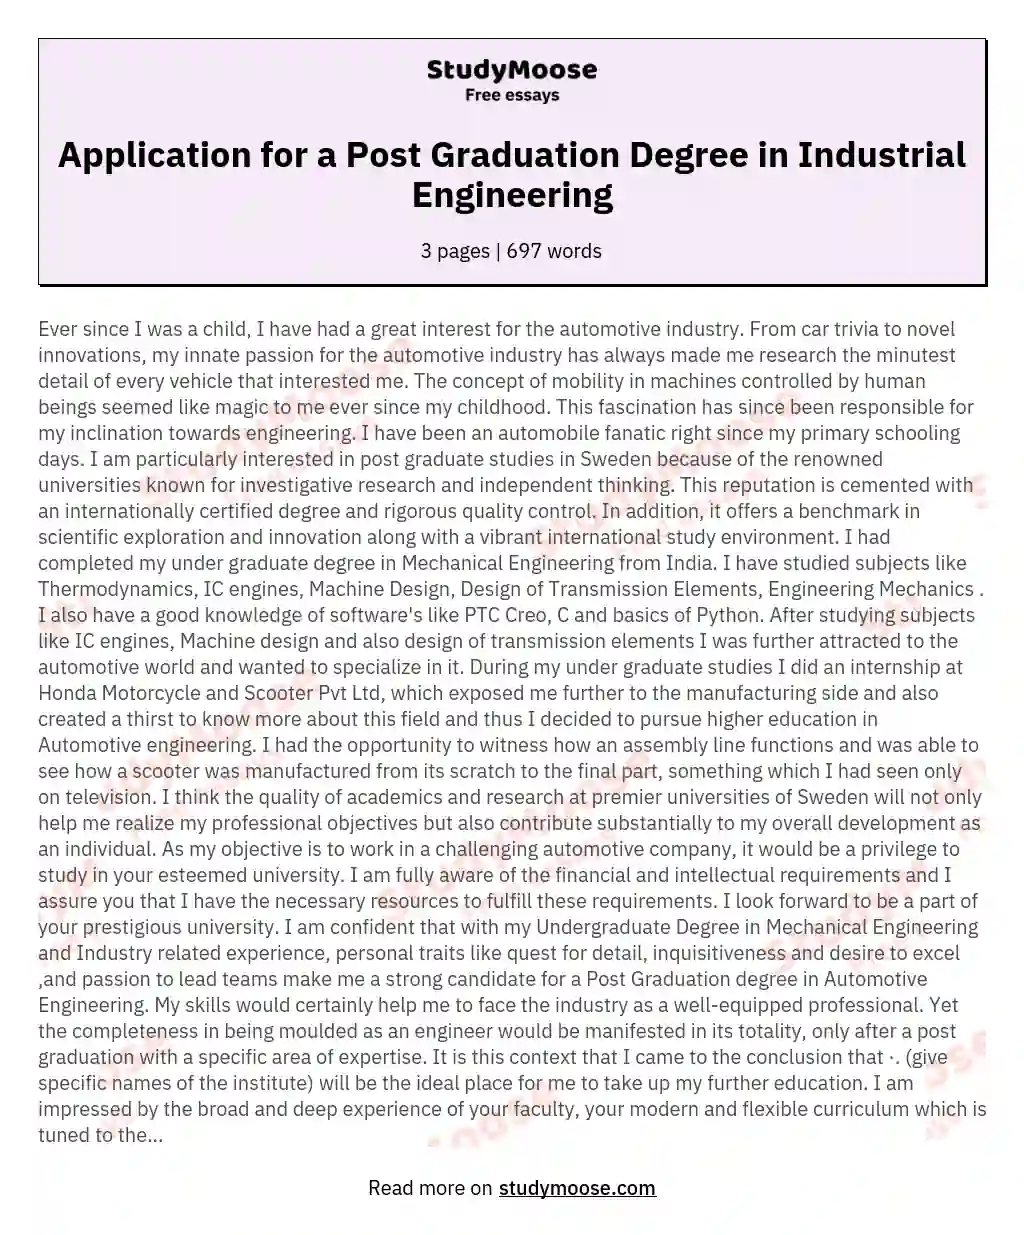 Application for a Post Graduation Degree in Industrial Engineering essay